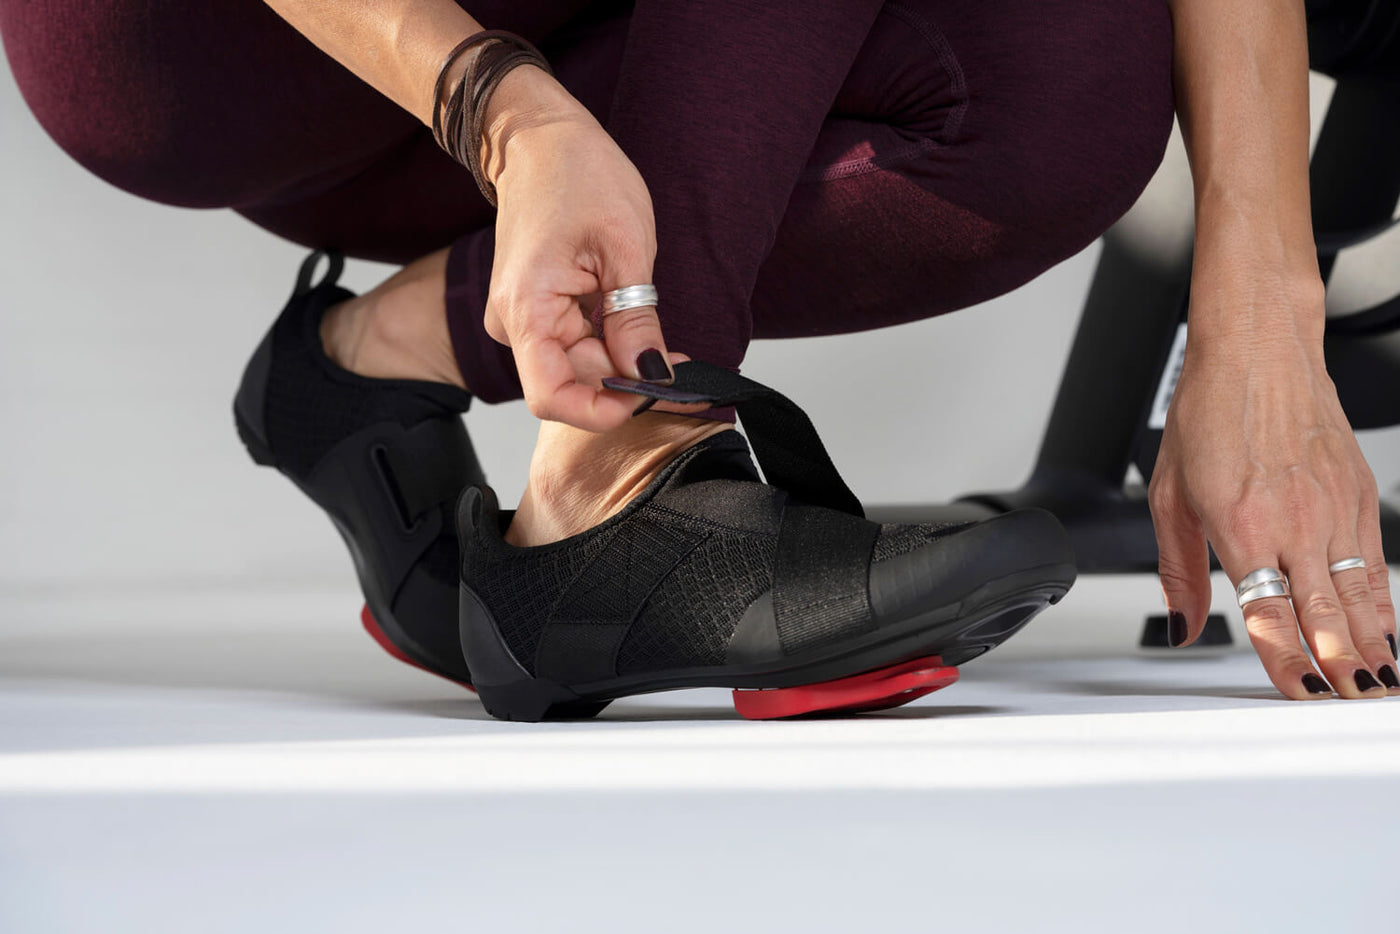 Shimano’s New IC1 Indoor Cycling Shoe is Gender Neutral, and Compatible with All Popular Pedal Systems (including the Peloton bike, SoulCycle bike, and more)